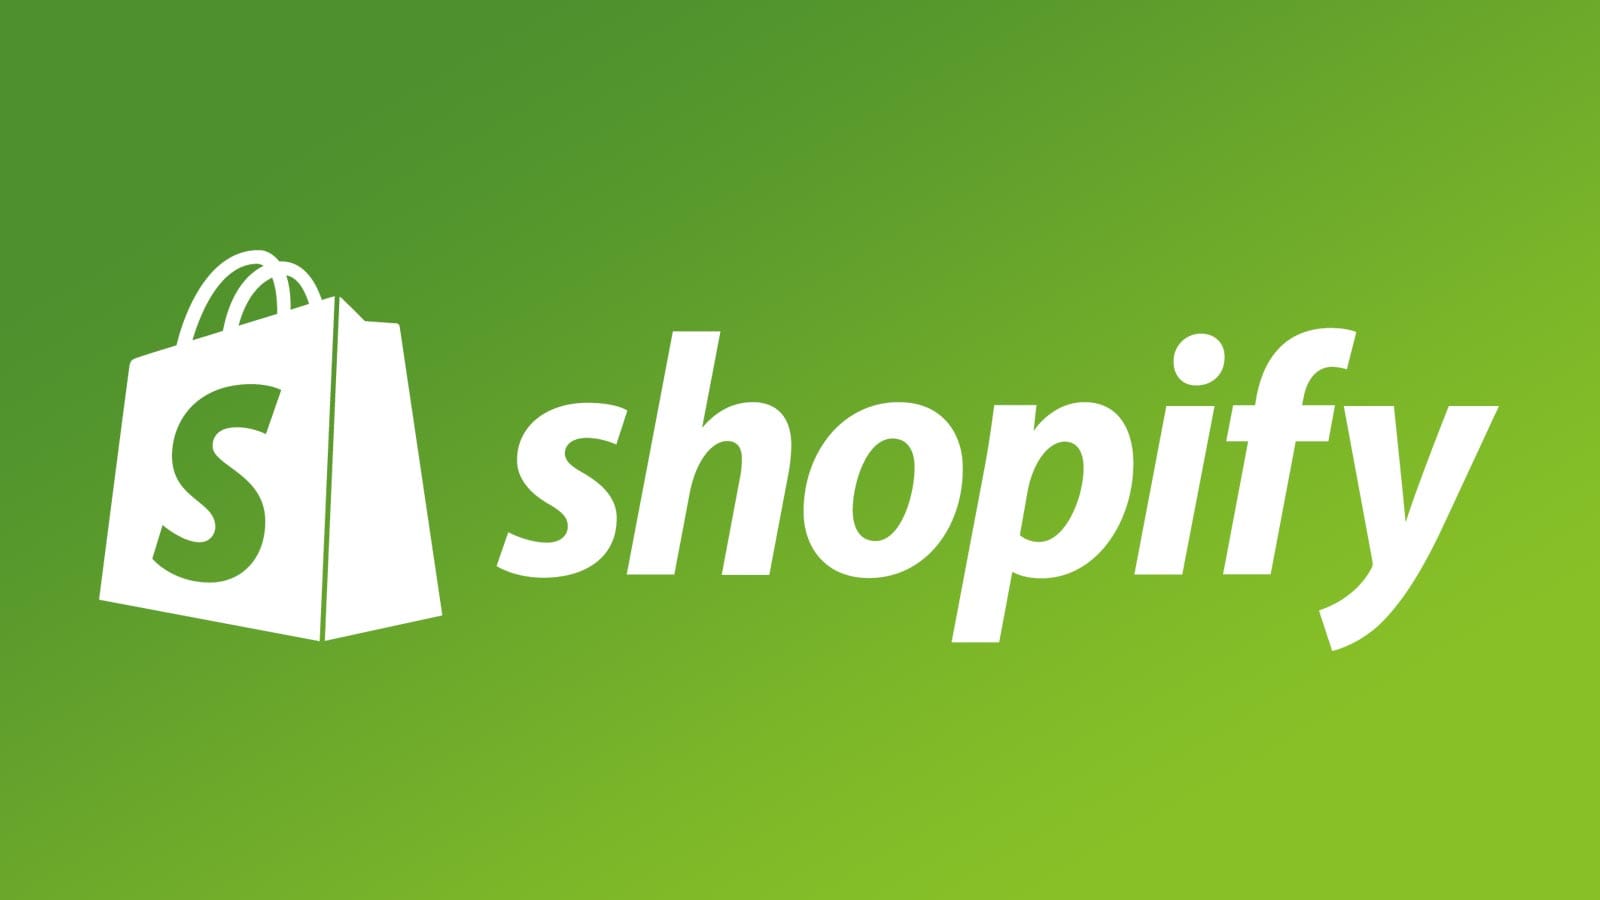 26 Free Shopify Tools, &amp; Other eCommerce Opportunities You Didn't Know About - Moving Traffic Media